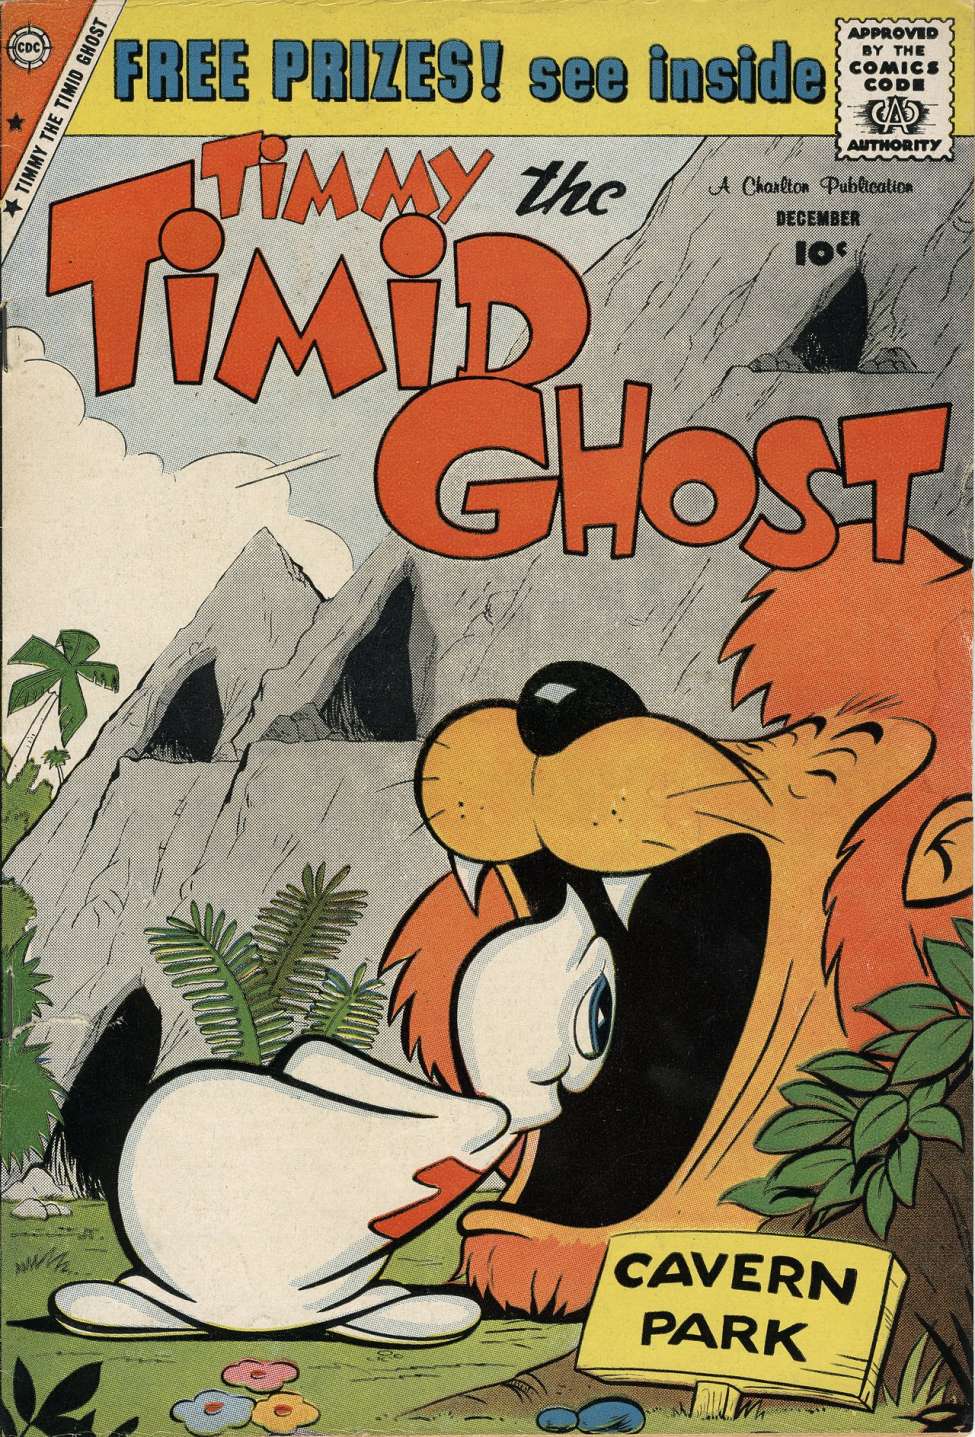 Book Cover For Timmy the Timid Ghost 18